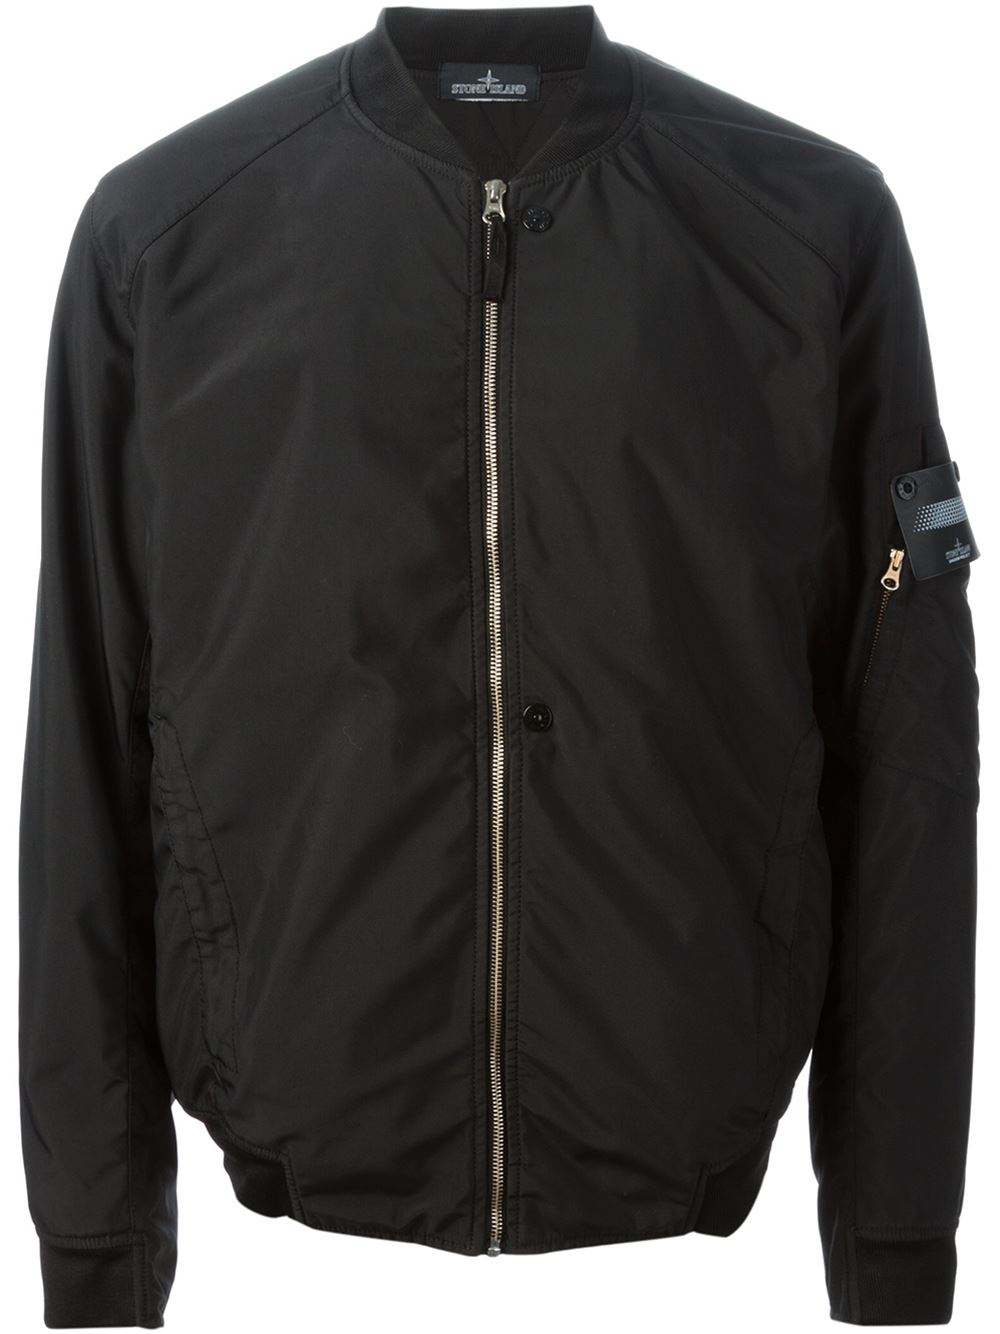 Lyst - Stone Island Fitted Bomber Jacket in Black for Men